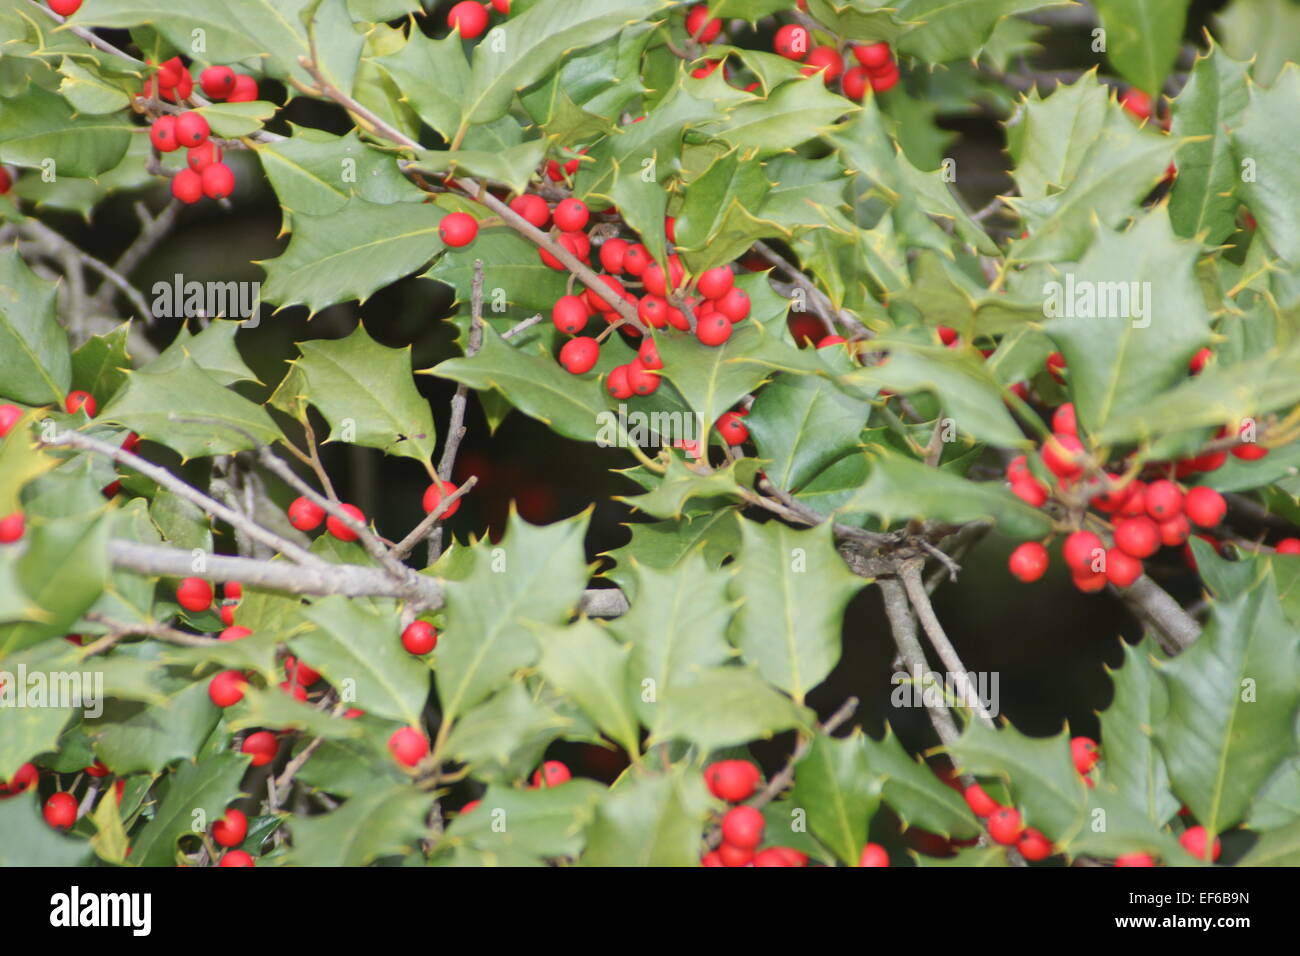 Holly berries and leaves from an American Holly Tree. Stock Photo